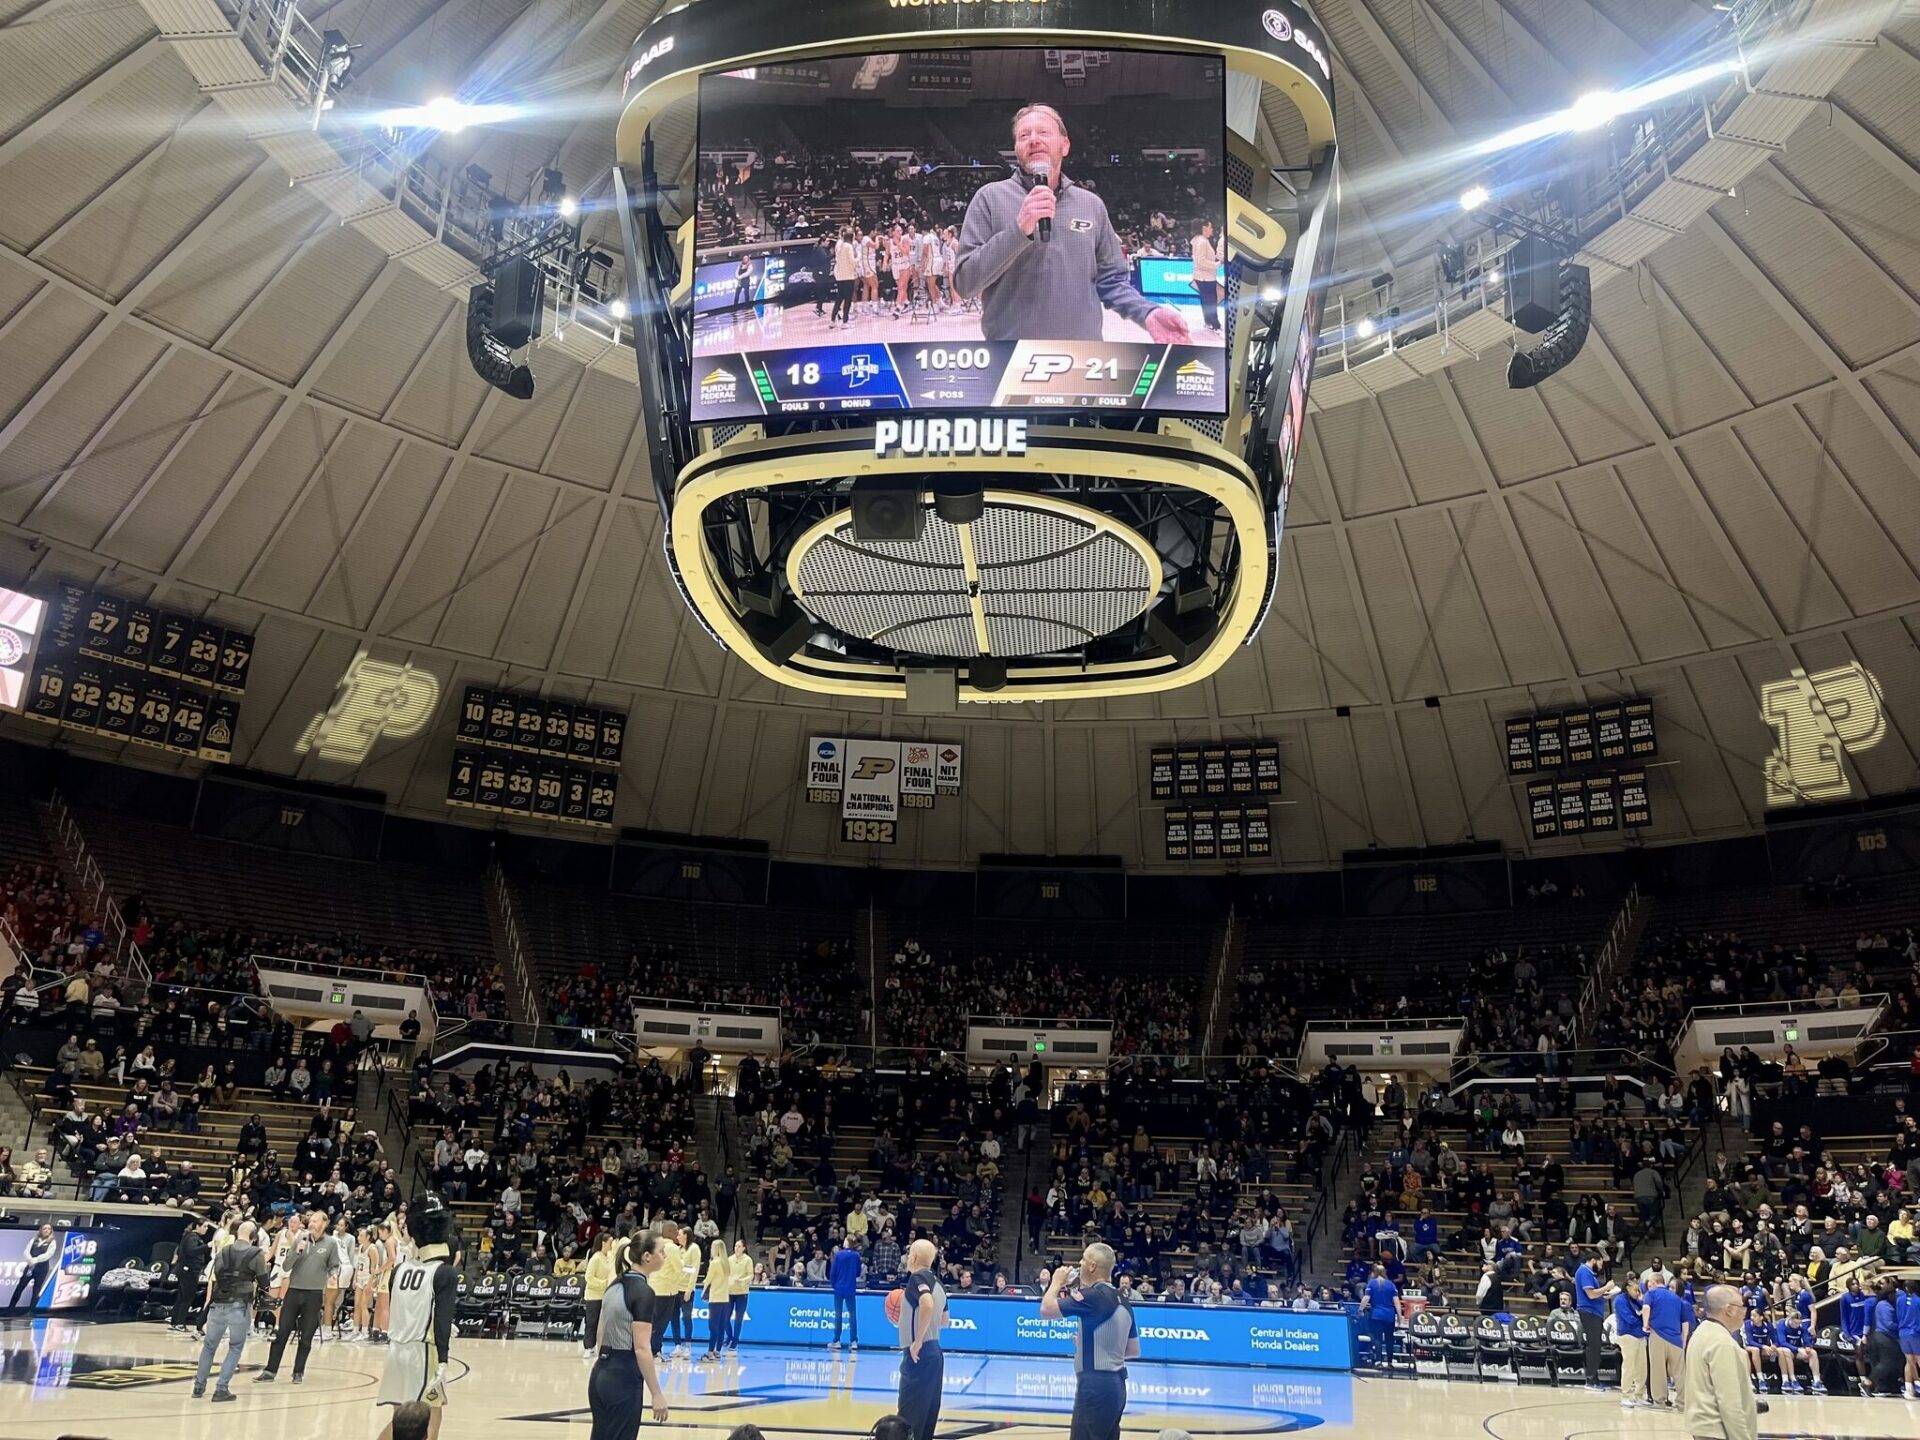 aculty and Staff Appreciation Day at the Purdue University Women’s Basketball home game today! We thank all our amazing teammates for a great year of 2023! 💛🖤